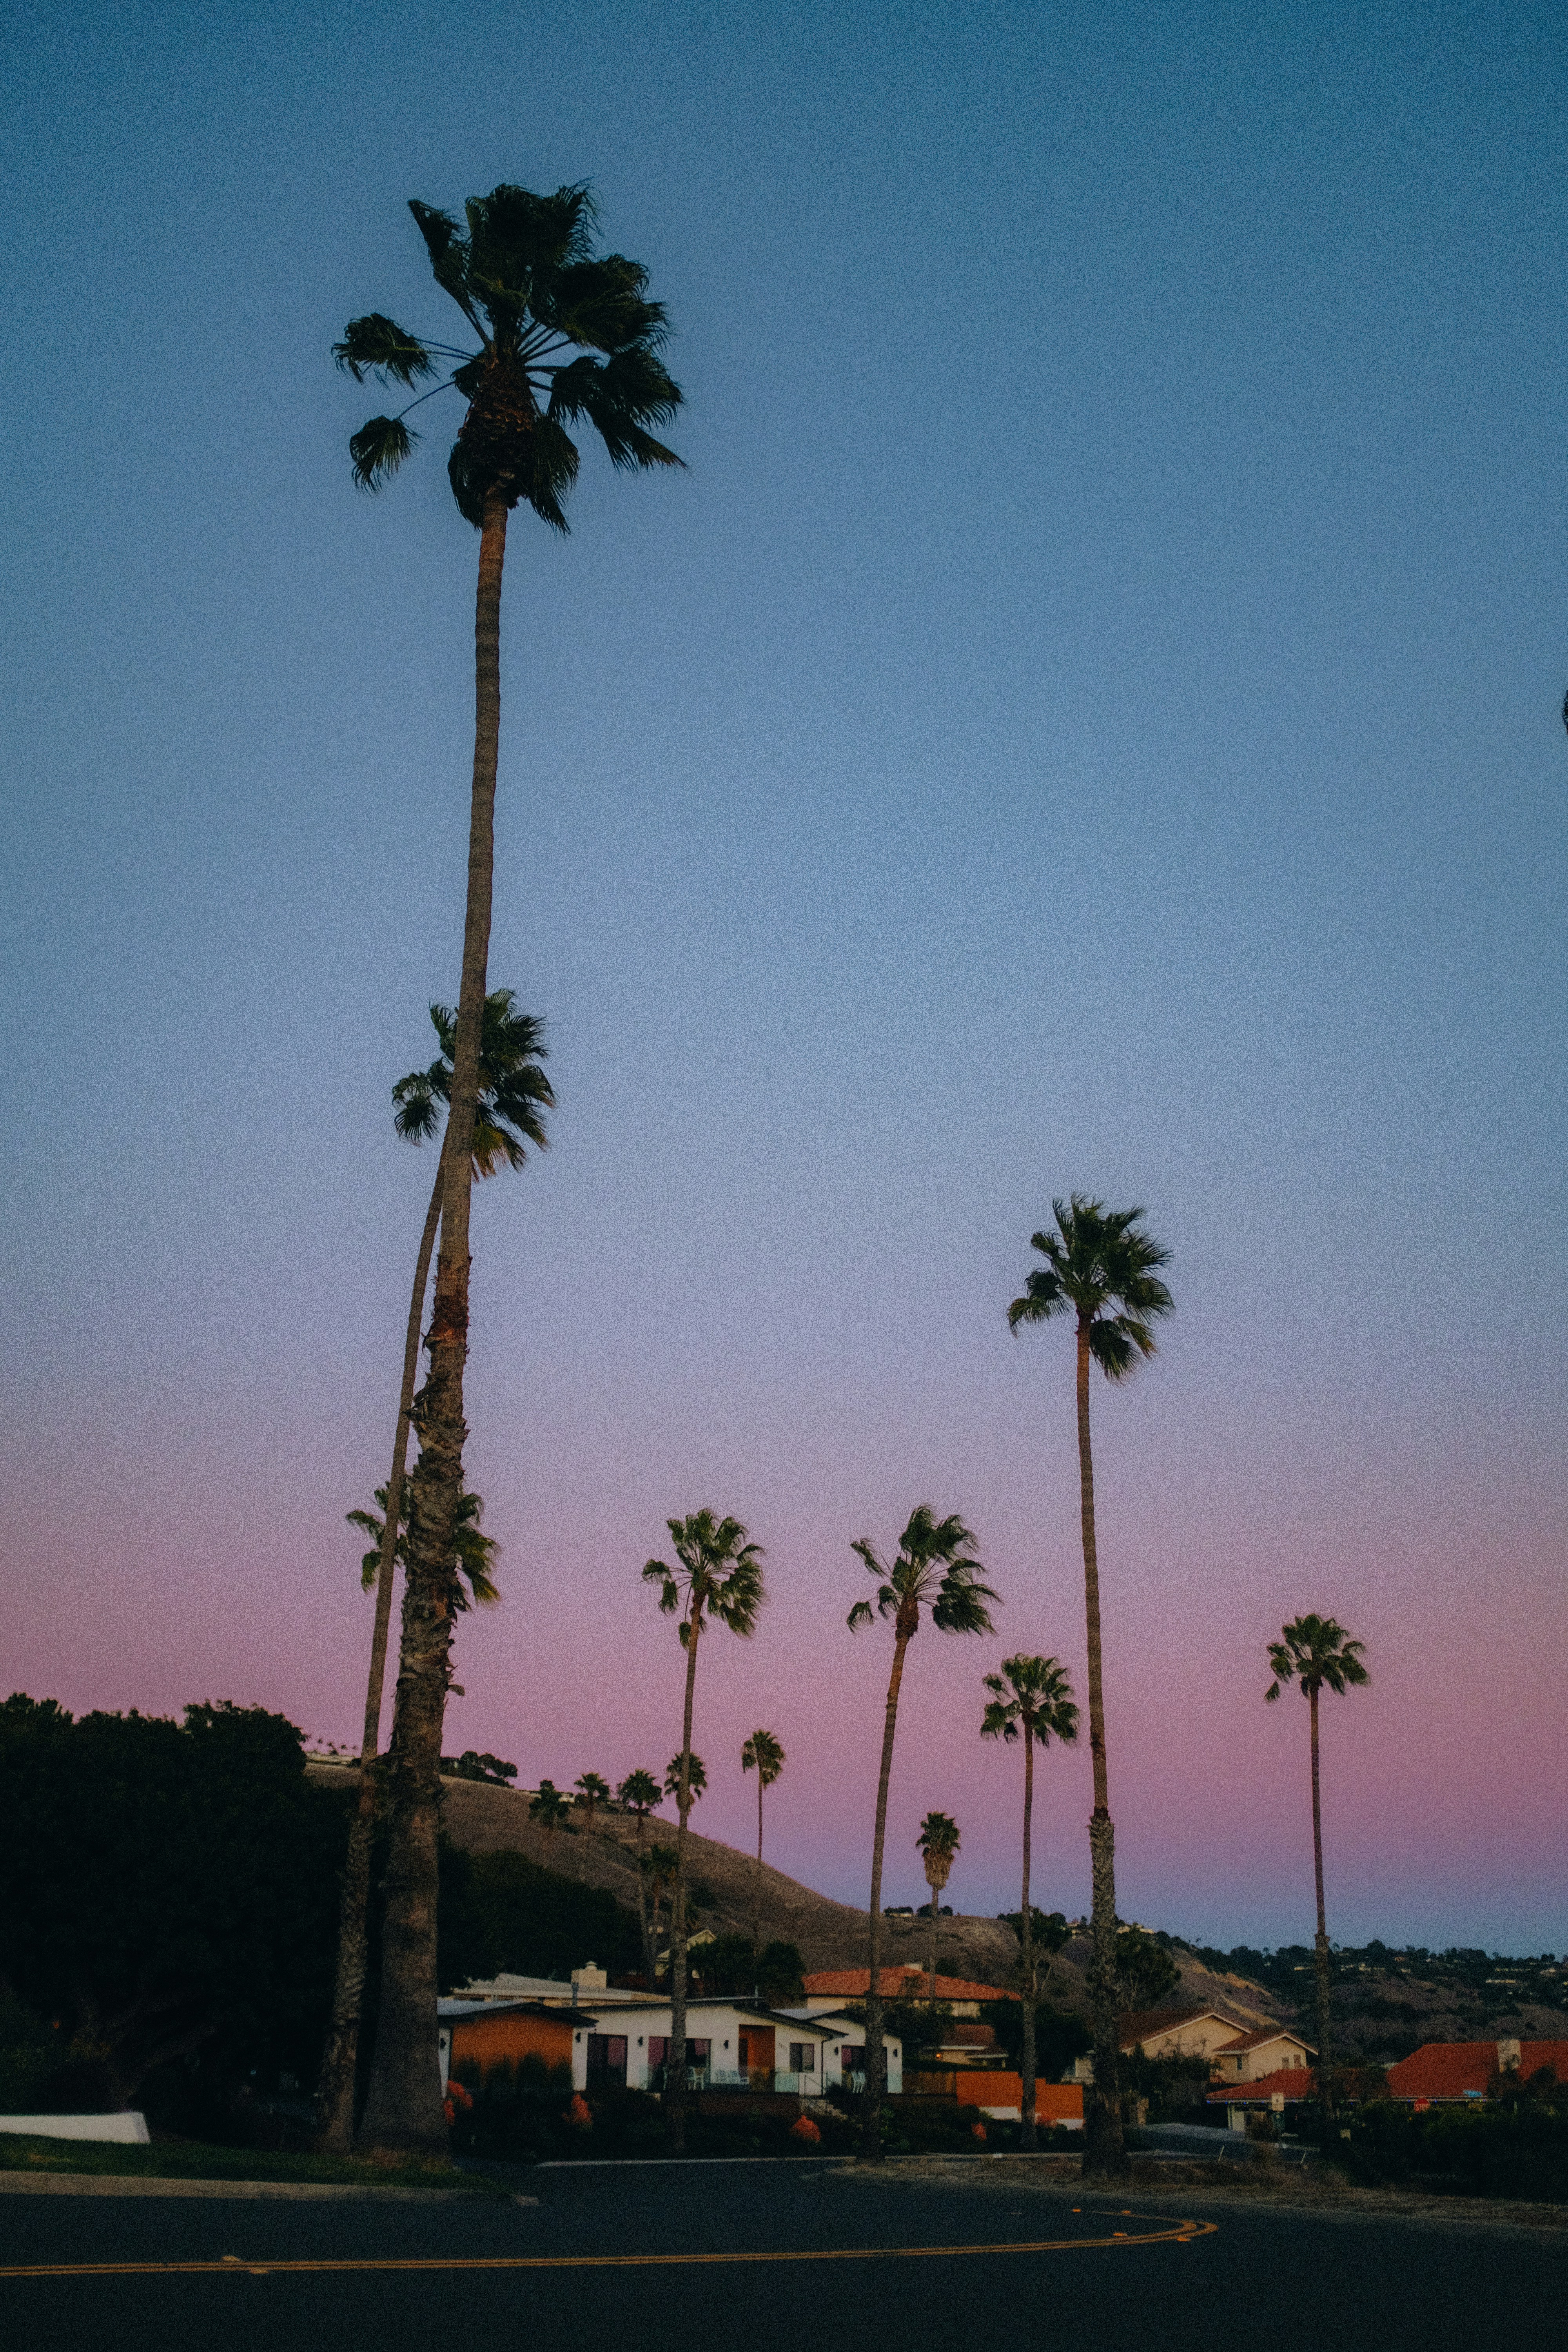 Palm trees lining the road of a residencial area in Rancho Palos Verdes, CA. In the background there is a pastel blue, pink and orange sky just after sunset behind the hills.